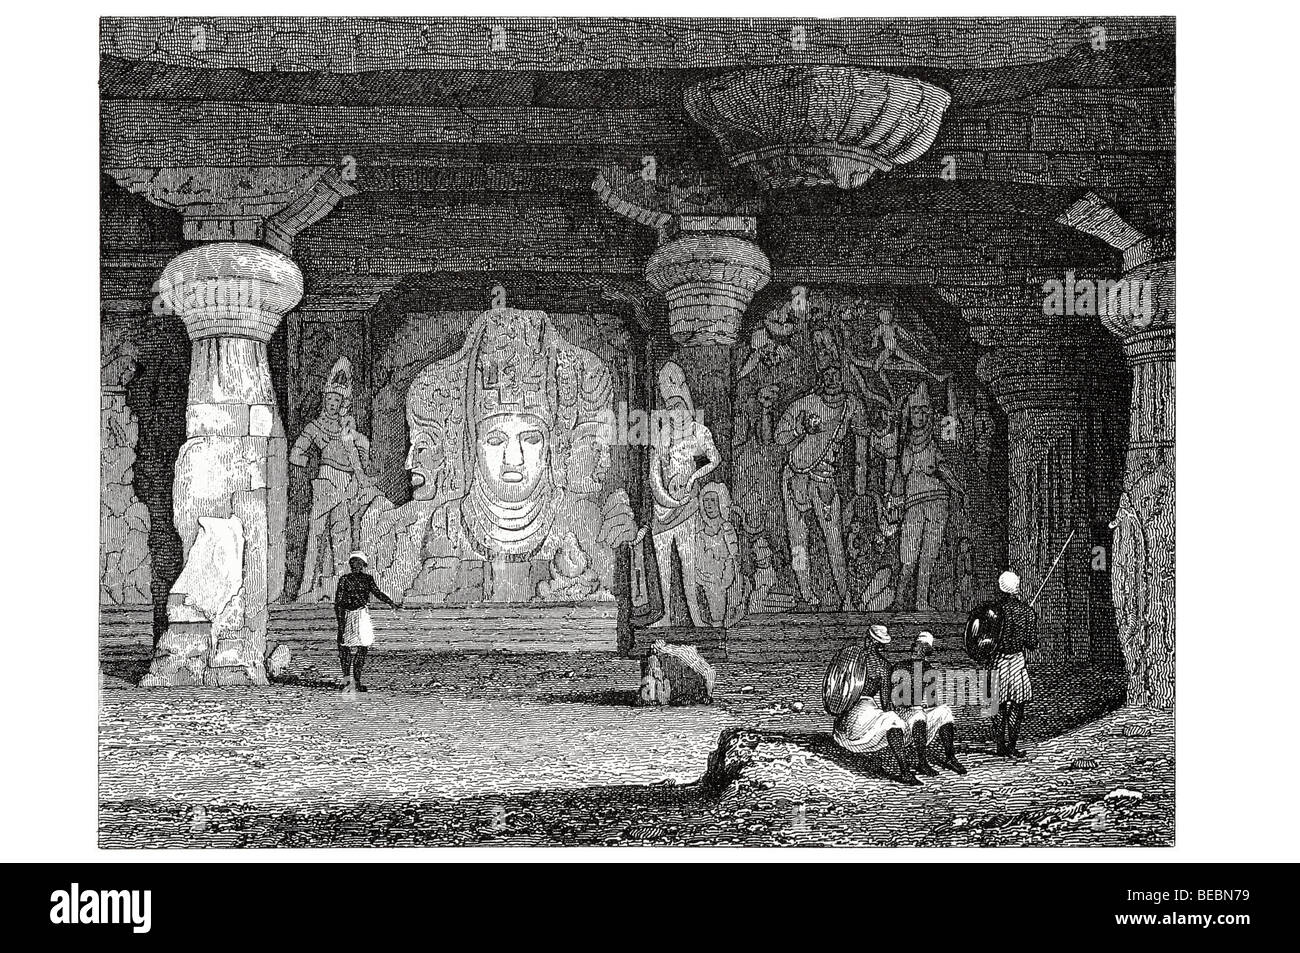 interior of the grotto temple on the Elephanta Caves sculpted cave Island Gharapuri Stock Photo